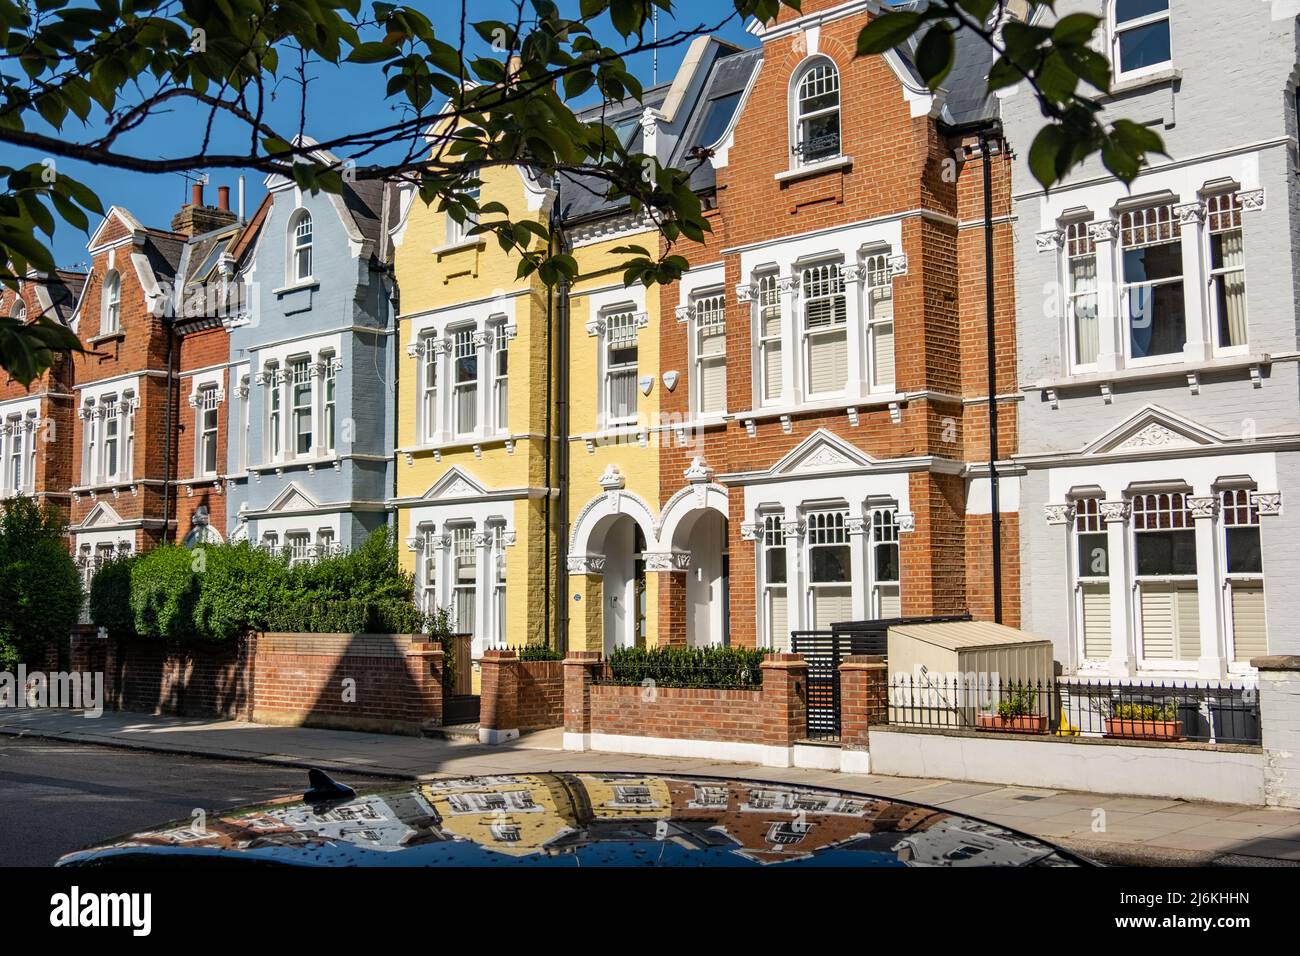 London- April 2022: An attractive street of period brick terraced houses in Shepherds Bush, Kensington area of west London Stock Photo